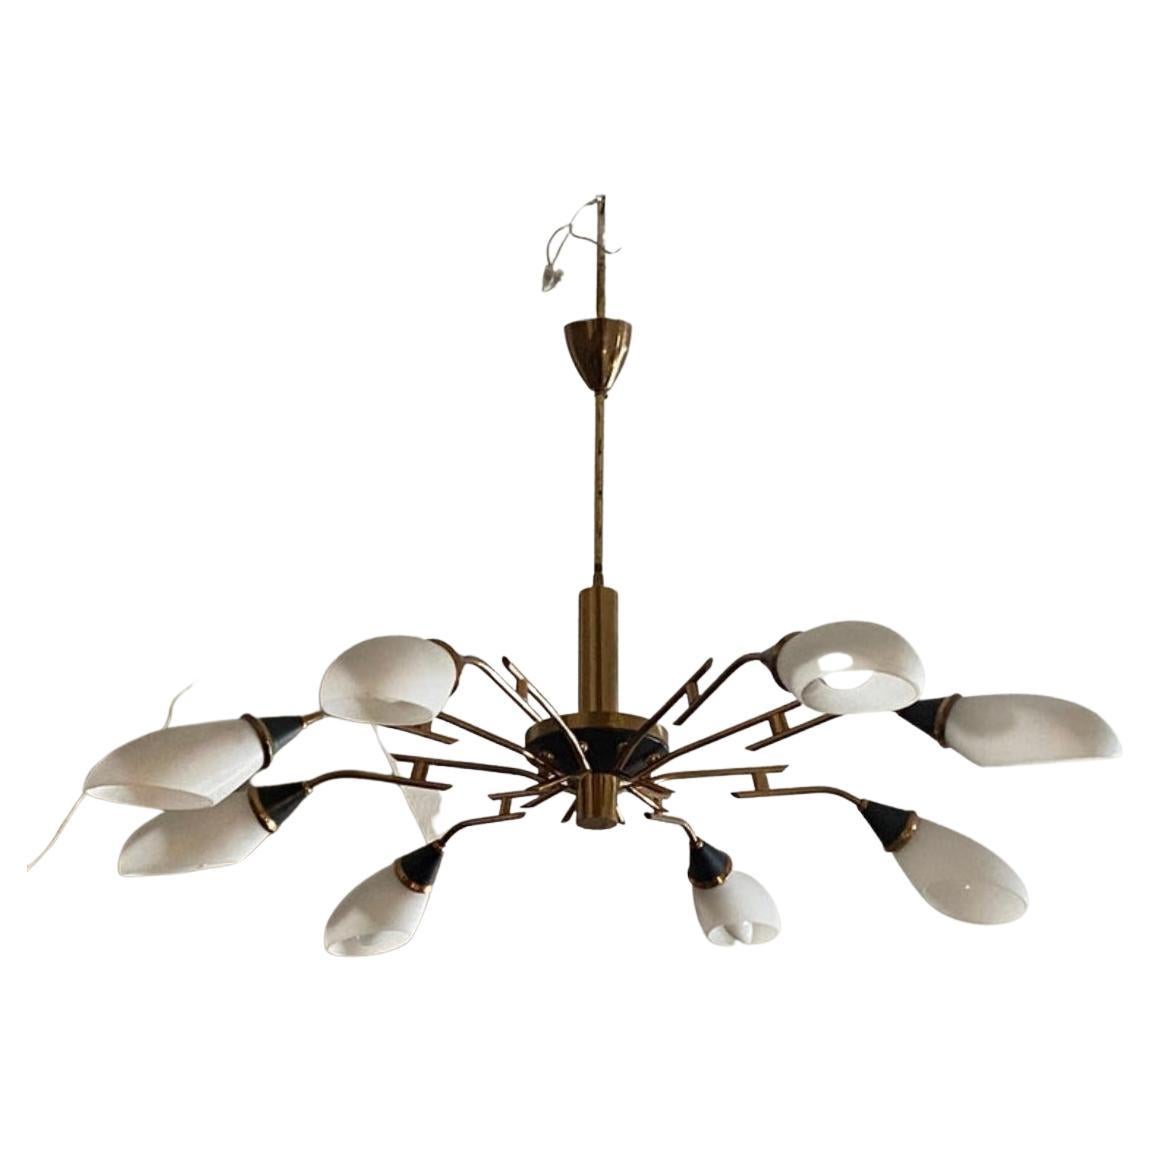 A Mid-Century Modern six lights chandelier designed and manufactured in Italy in the sixties it's a beautiful and iconic piece of lighting that embodies the clean lines, elegant simplicity, and functional design of Mid-Century Modern style.
The